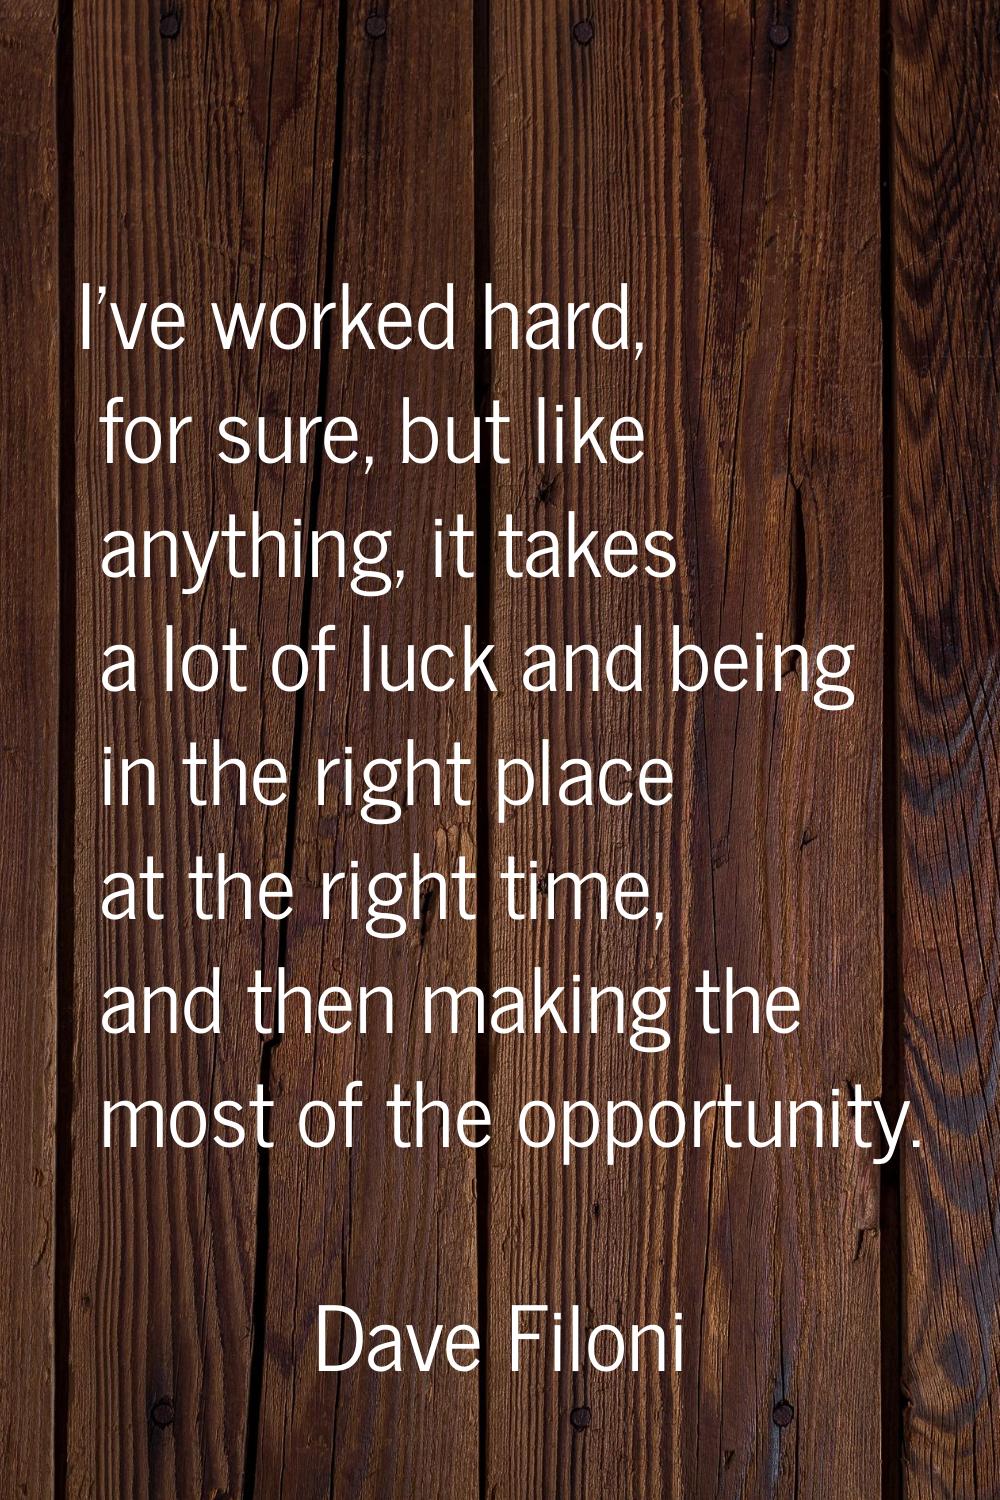 I've worked hard, for sure, but like anything, it takes a lot of luck and being in the right place 